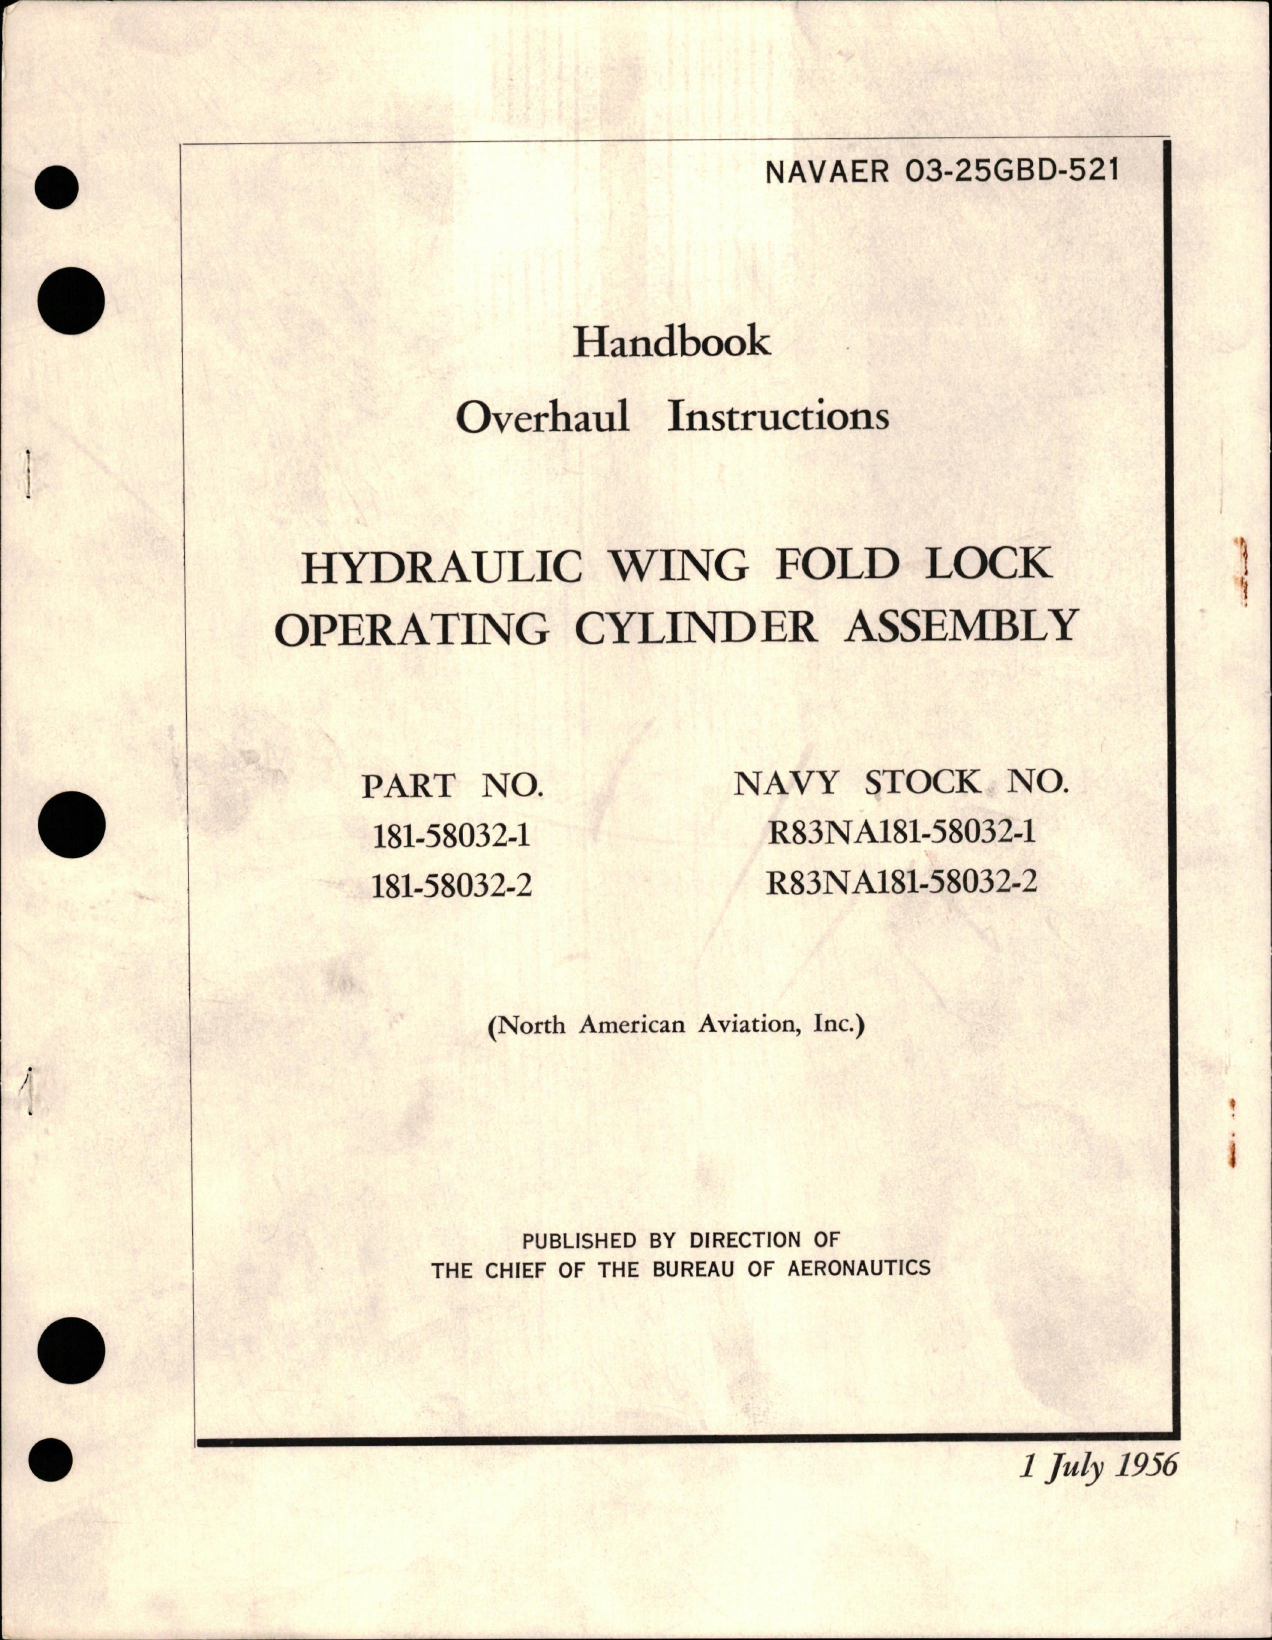 Sample page 1 from AirCorps Library document: Overhaul Instructions for Hydraulic Wing Fold Lock Operating Cylinder Assembly - Part 181-58032-1 and 181-58032-2 